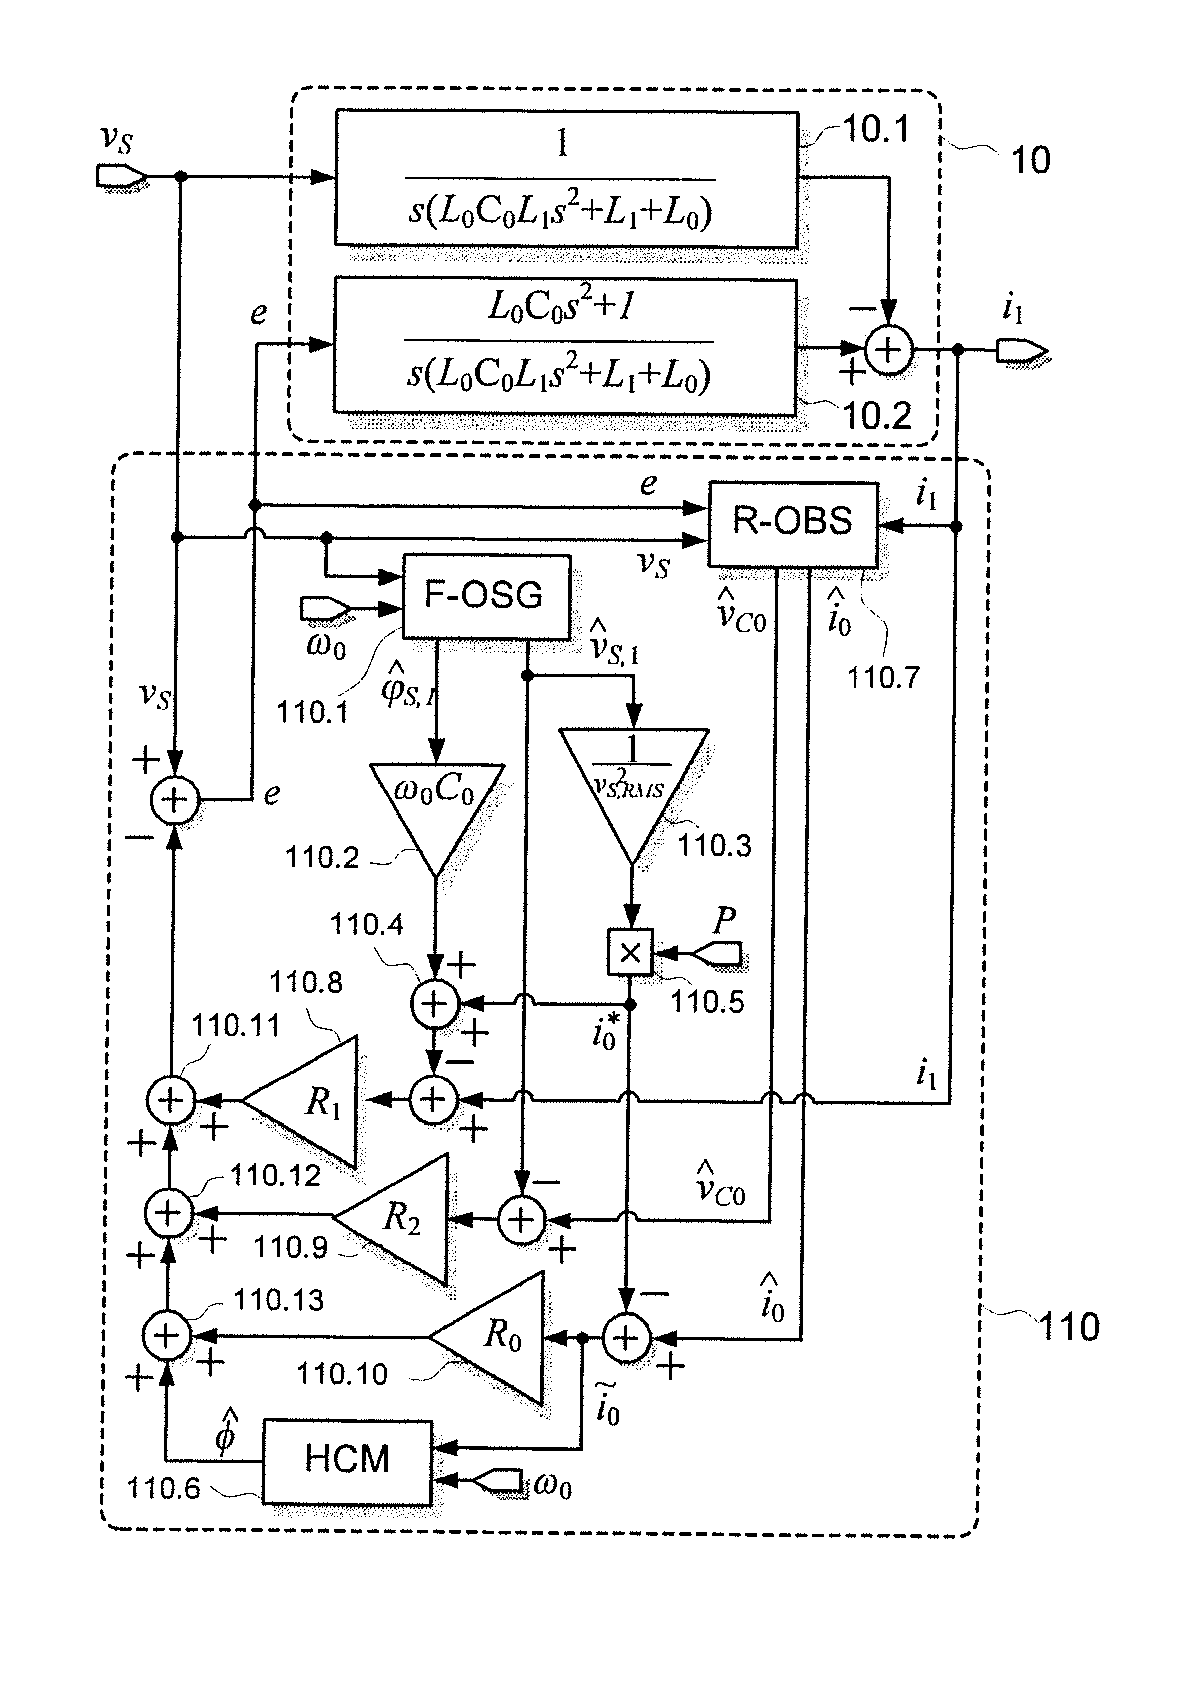 Control method for single-phase grid-connected LCL inverter